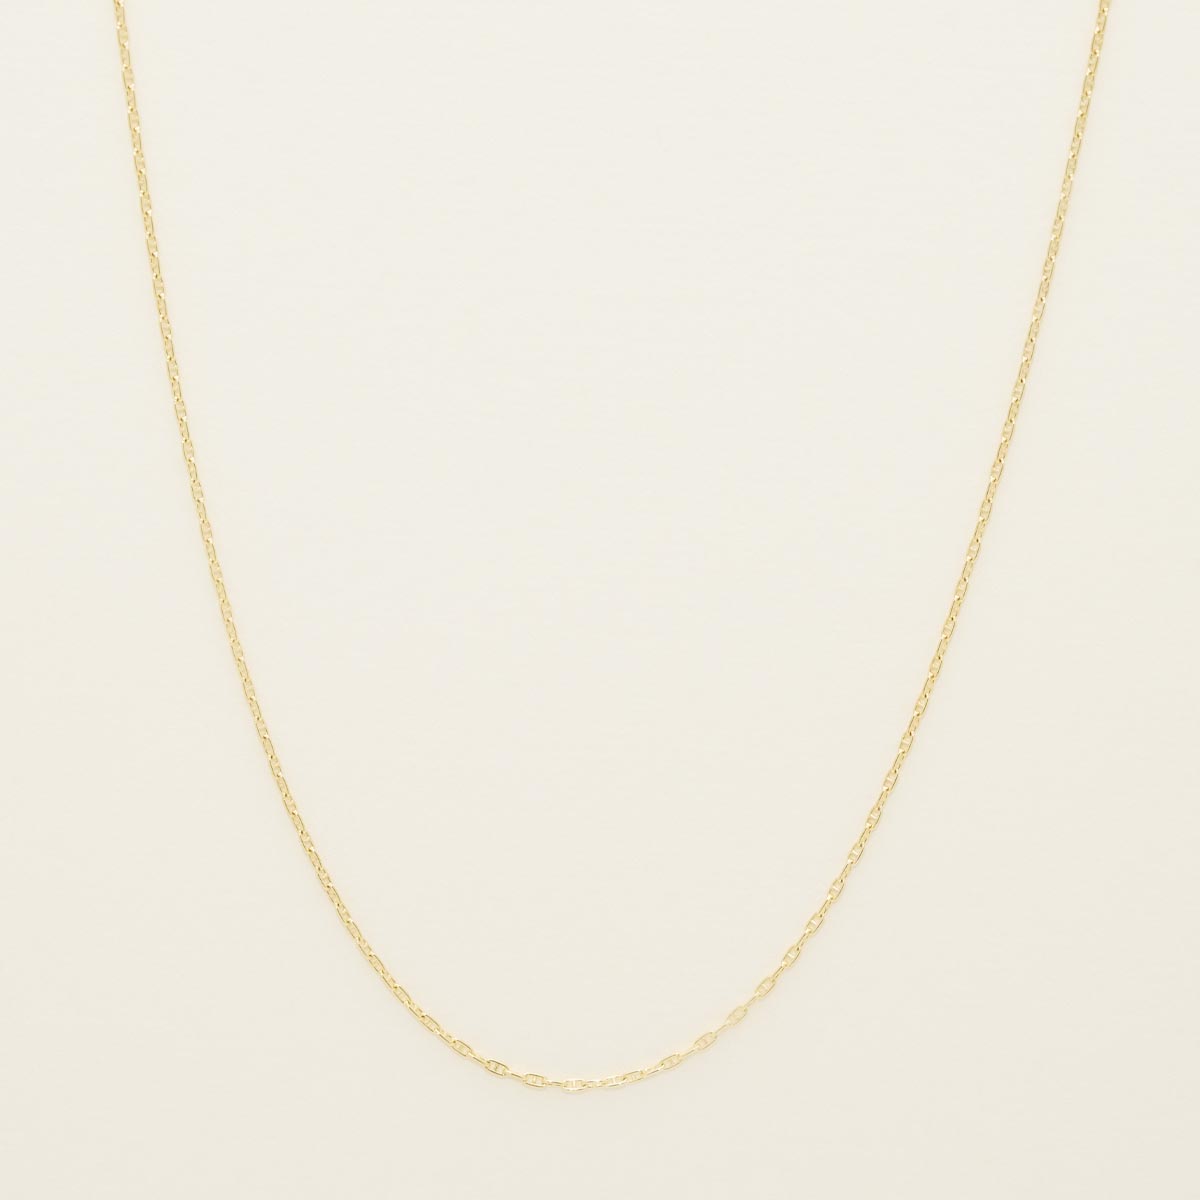 Mariner Link Chain in 14kt Yellow Gold (18 inches and 1mm wide)